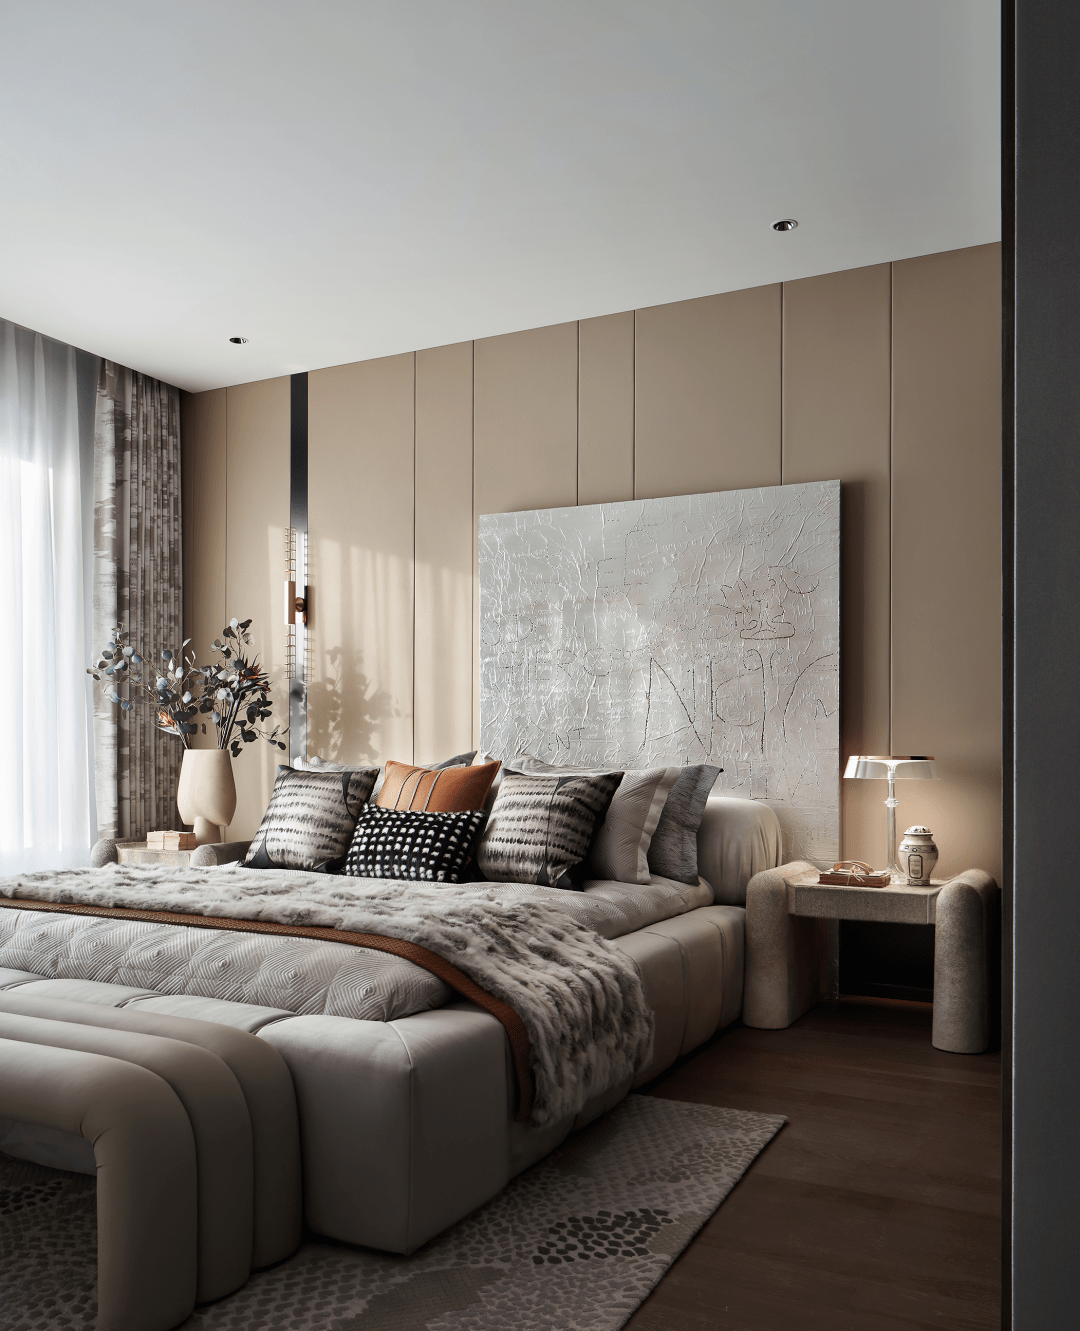 First release｜245㎡ luxury apartment in Shenyang, the interior has a unique texture!